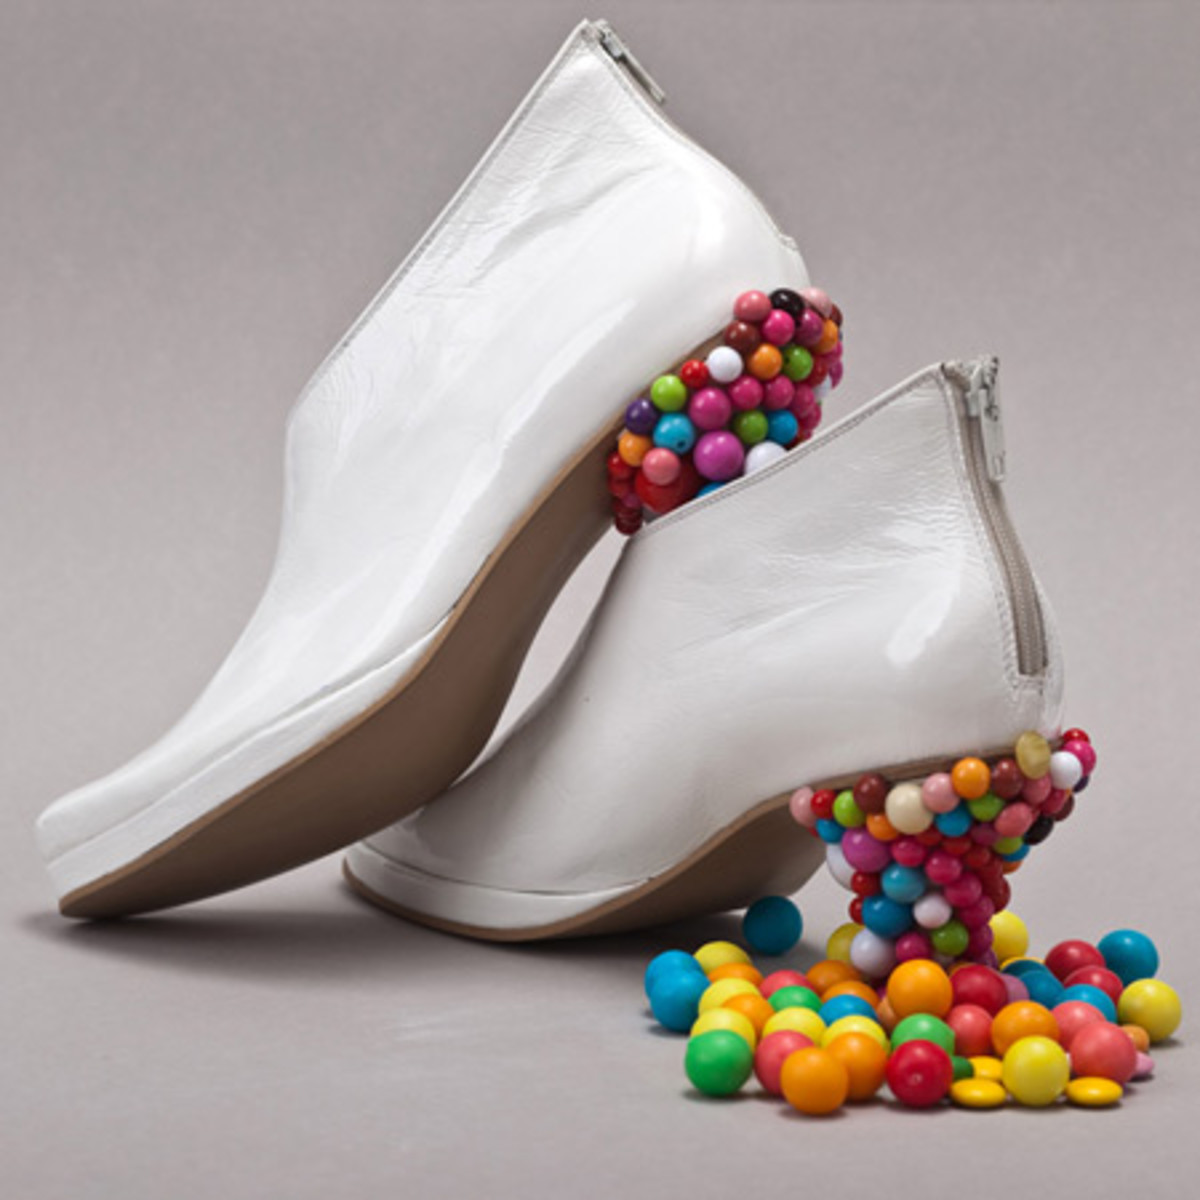 Ugly Shoes - Freaky Shoes - Weird Shoes - Crazy High Heels